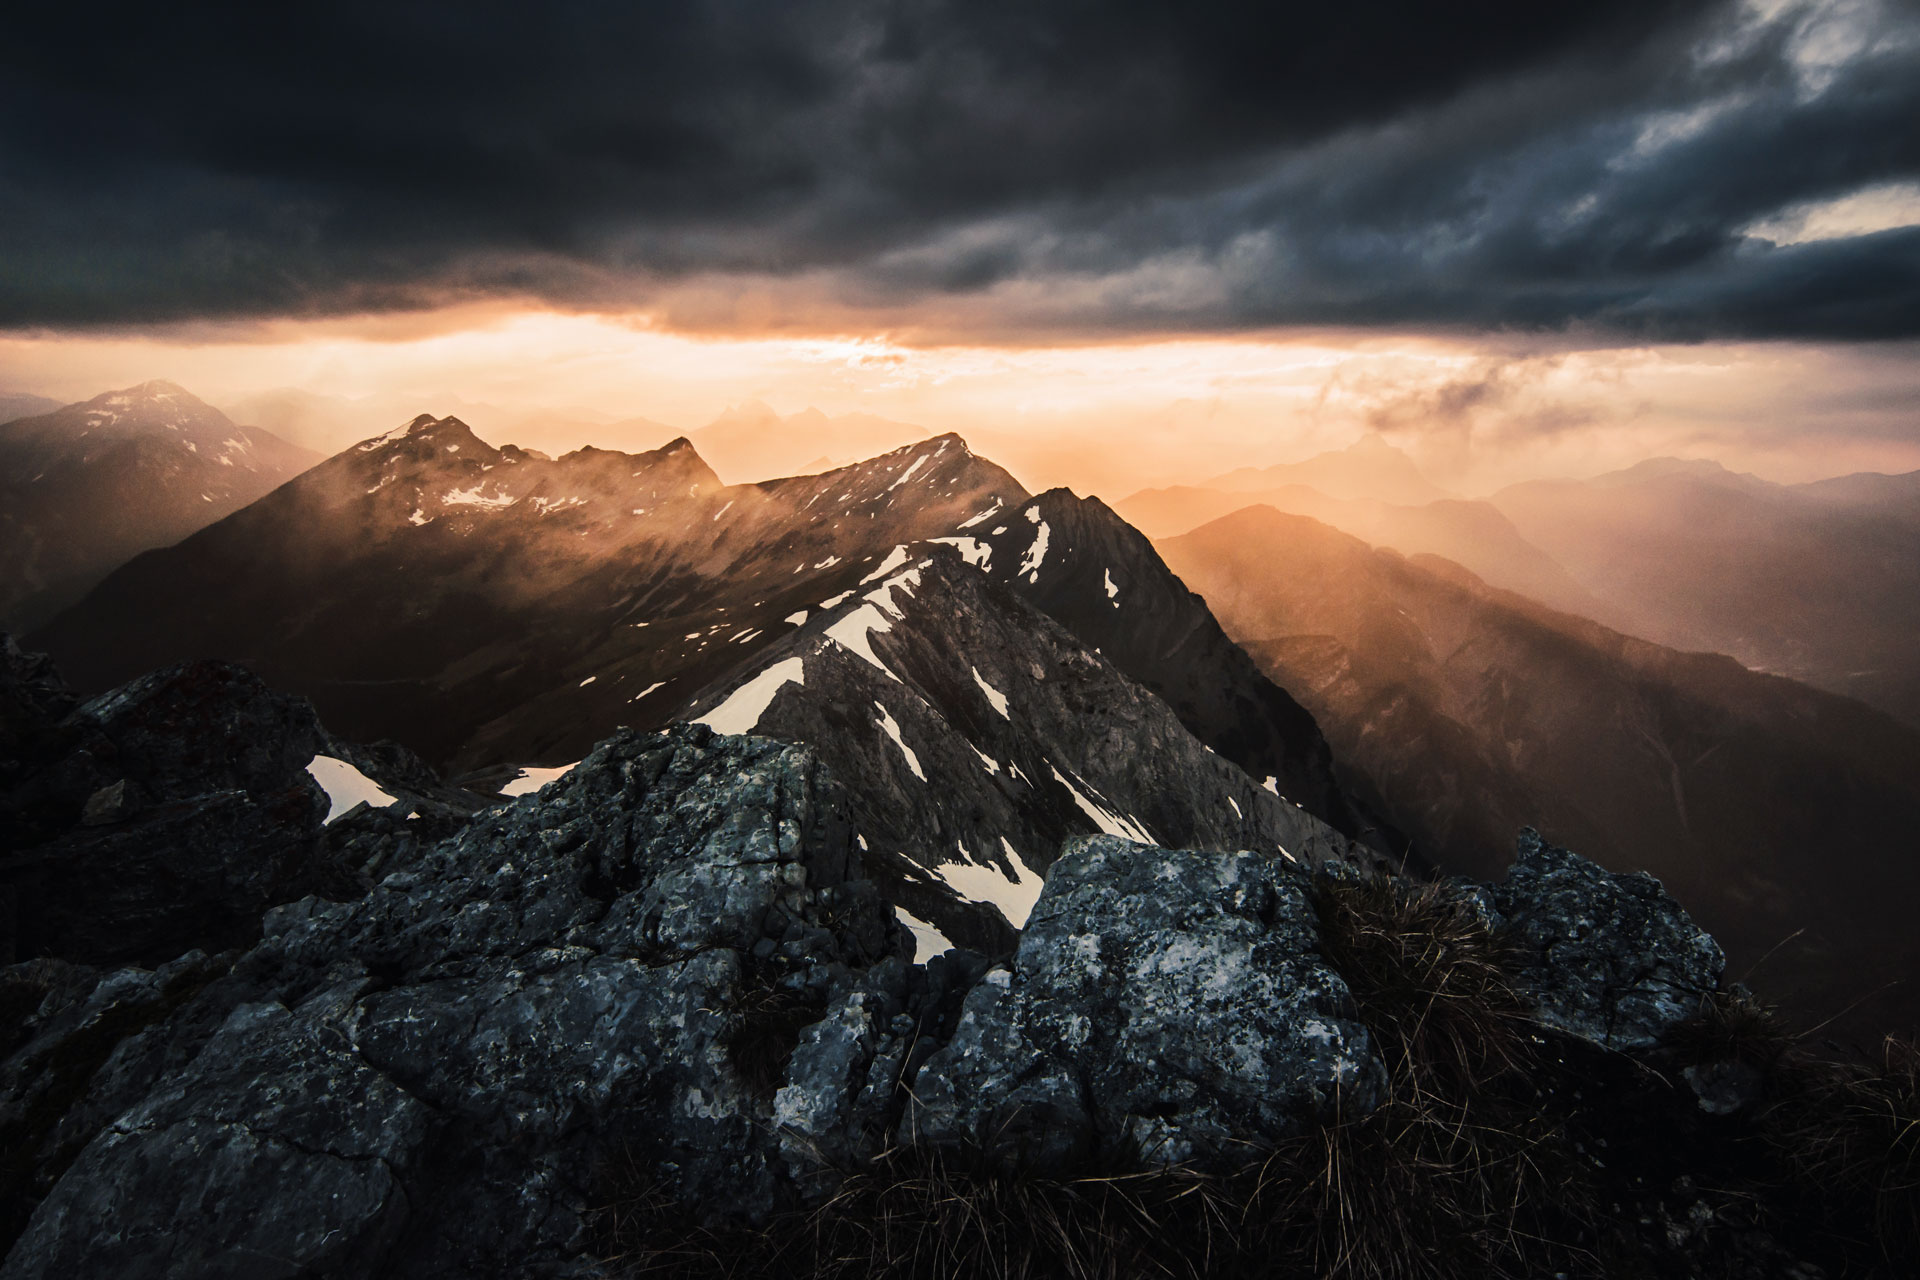 Photo of a sunset after a storm over mountains, Austria.